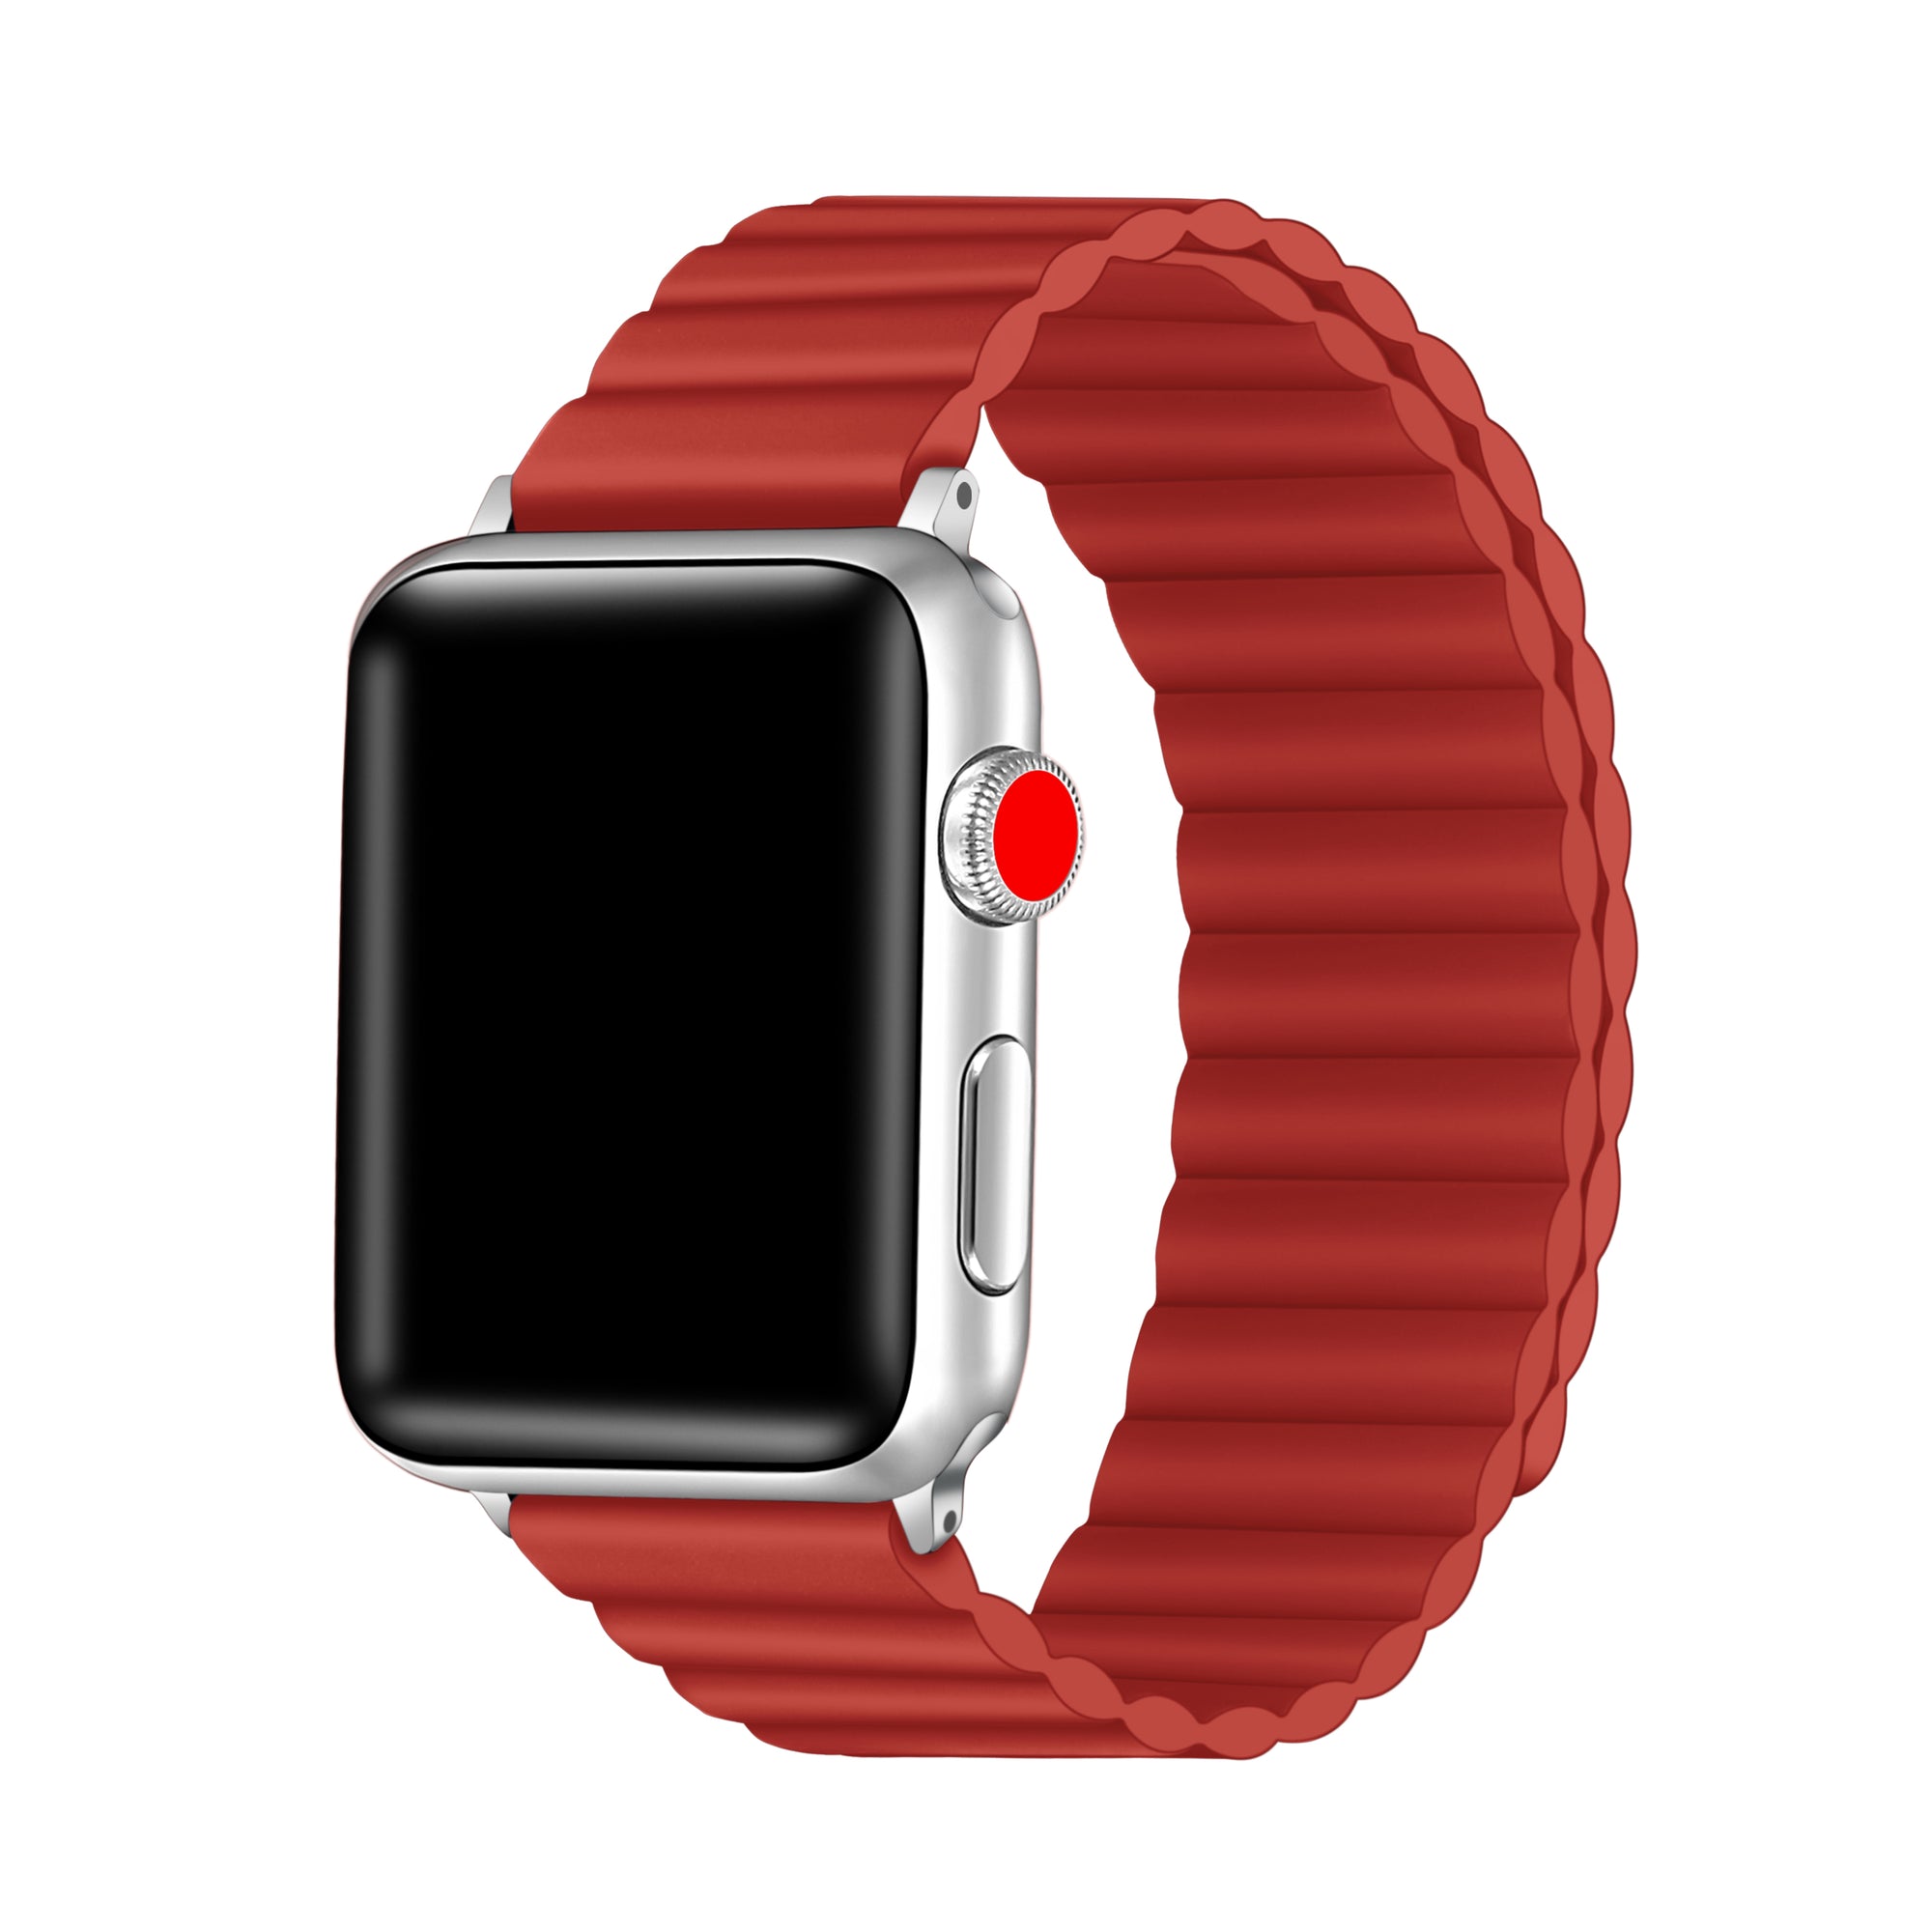 All Silicone Bands For Apple Watch – Fancy Bands